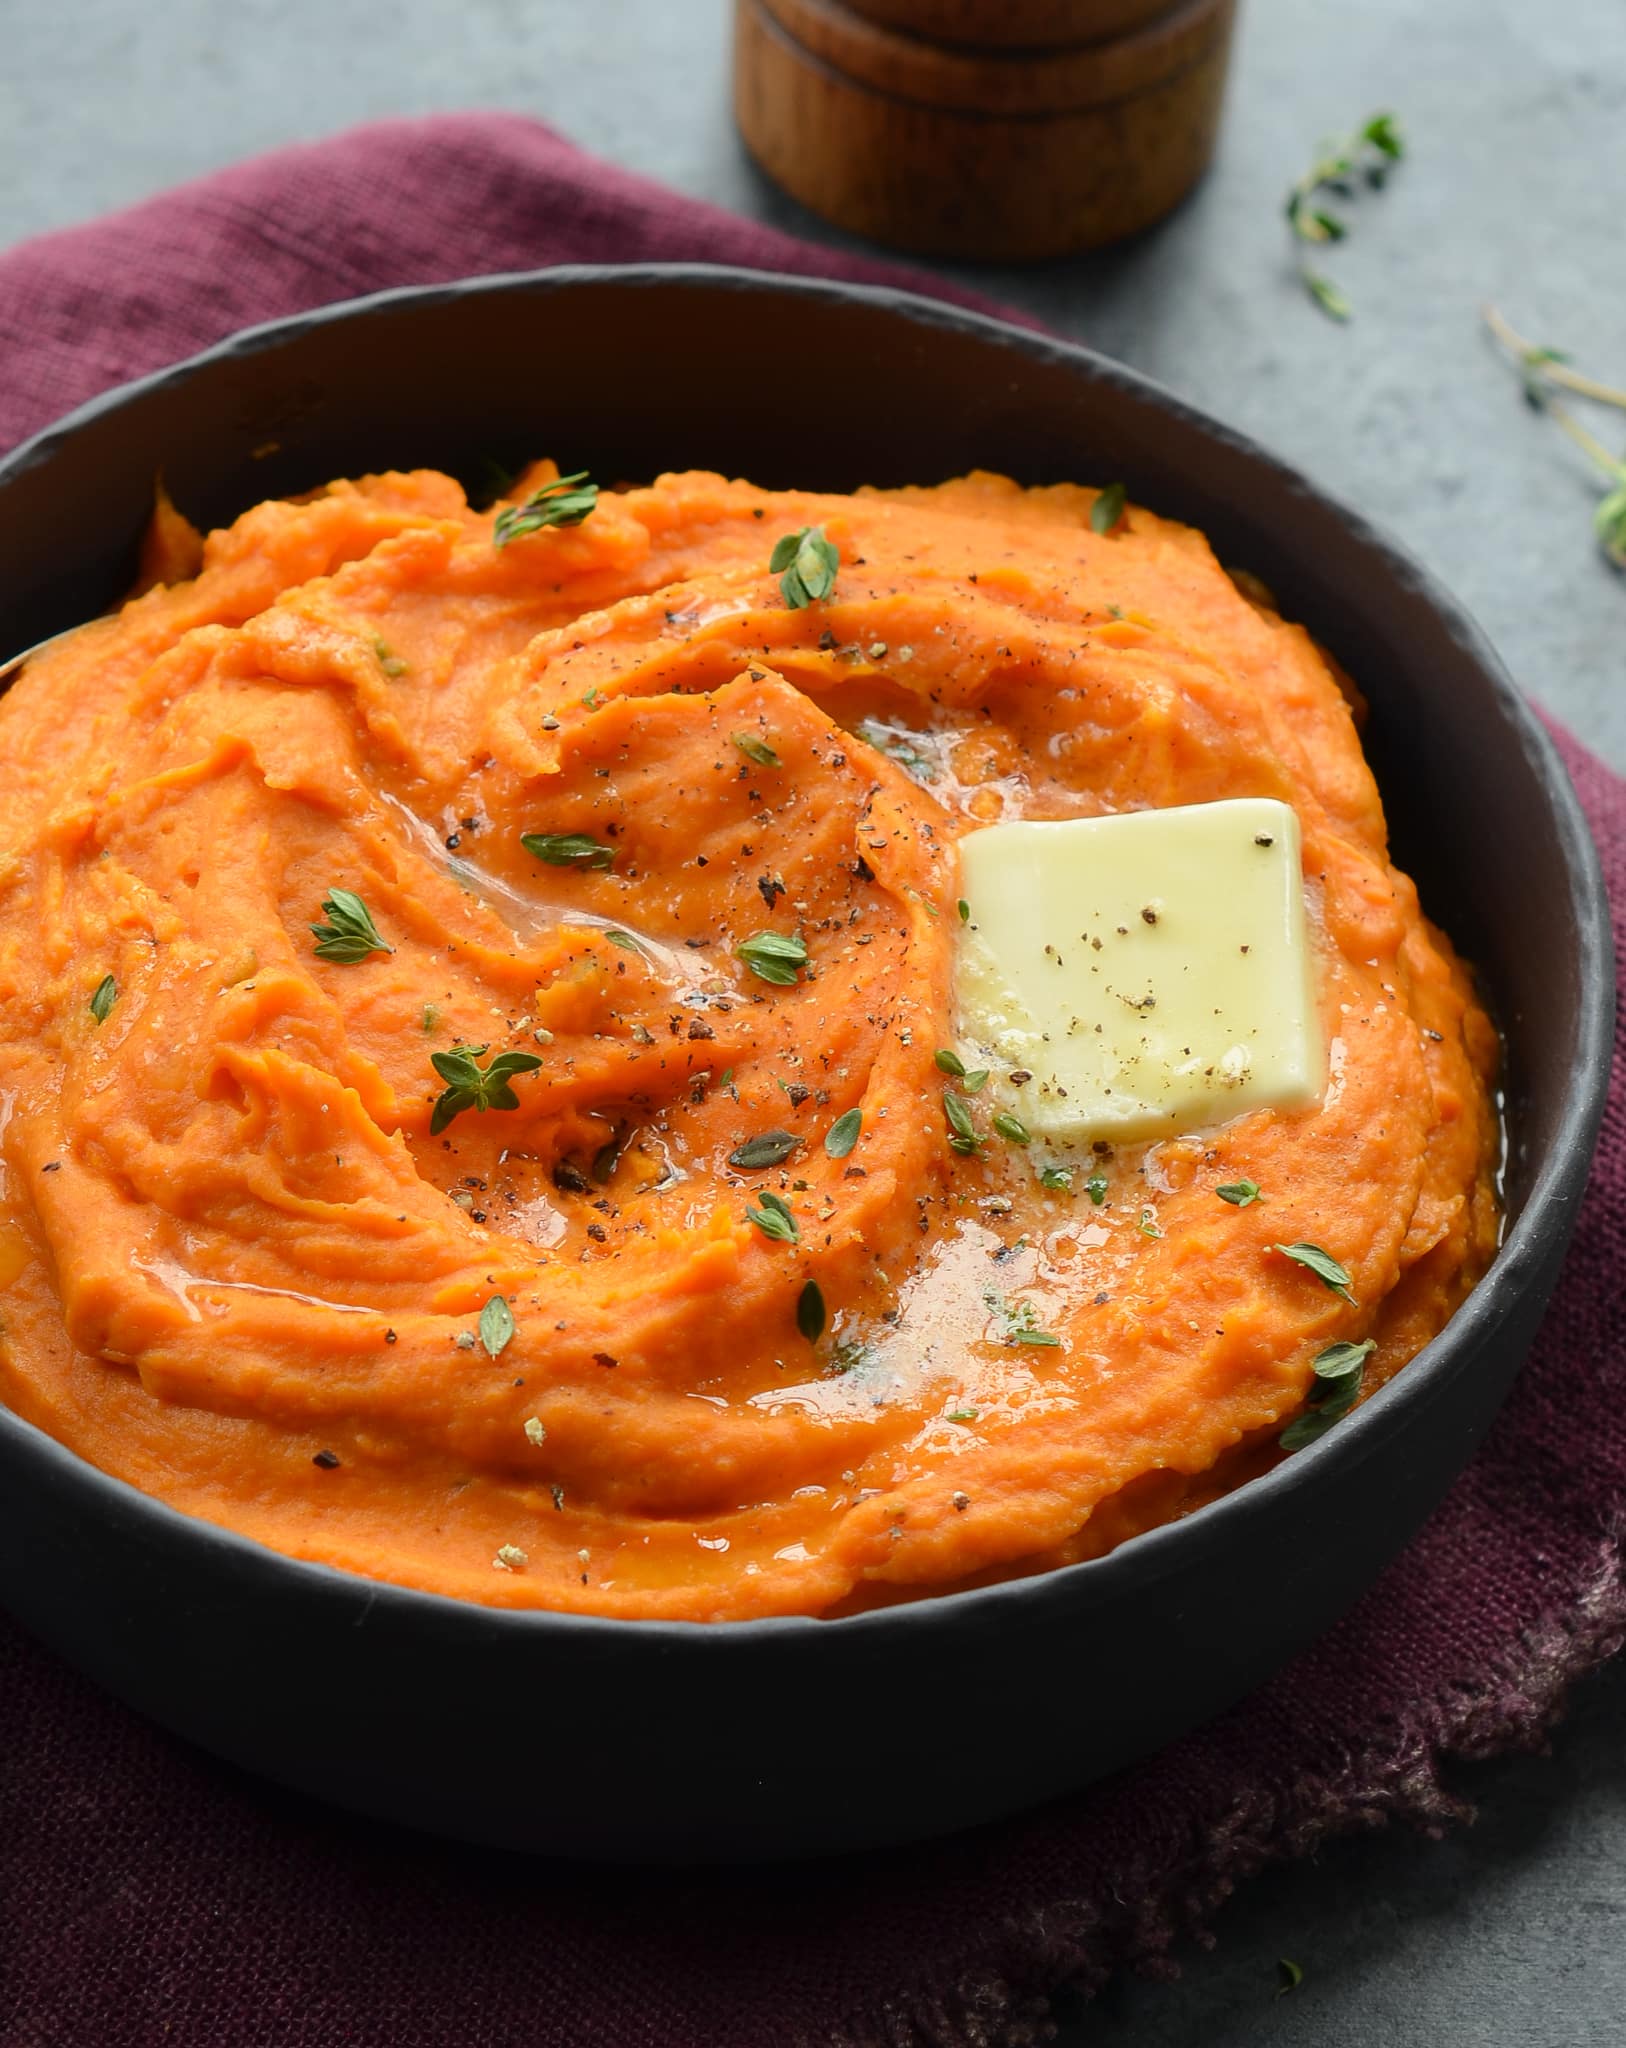 Mashed sweet potatoes in a black bowl topped with butter.